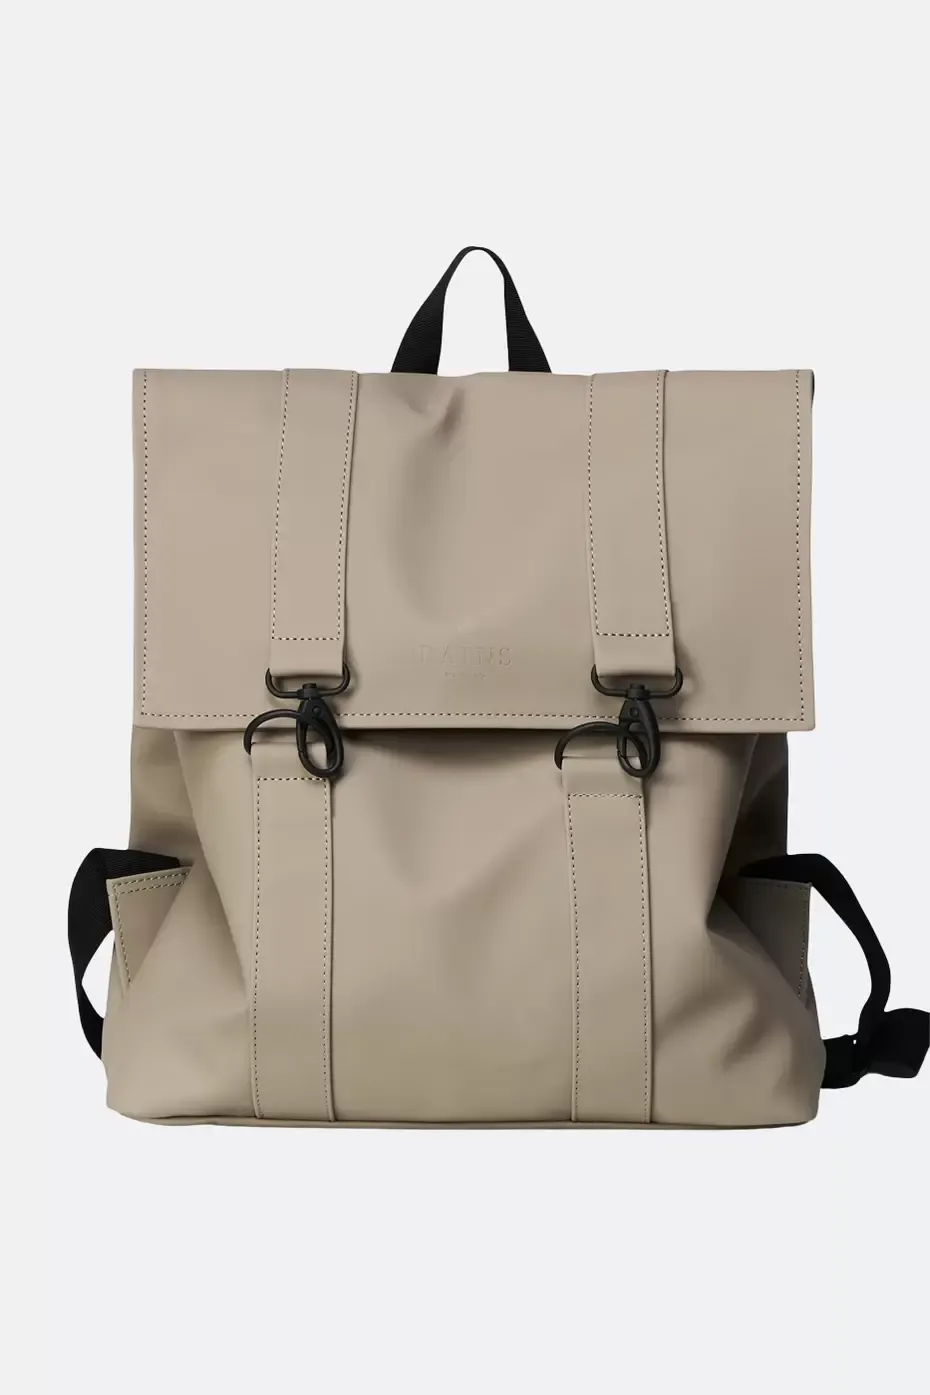 16 Laptop-Friendly Backpacks For The Back-At-Work Commuter | HuffPost Life